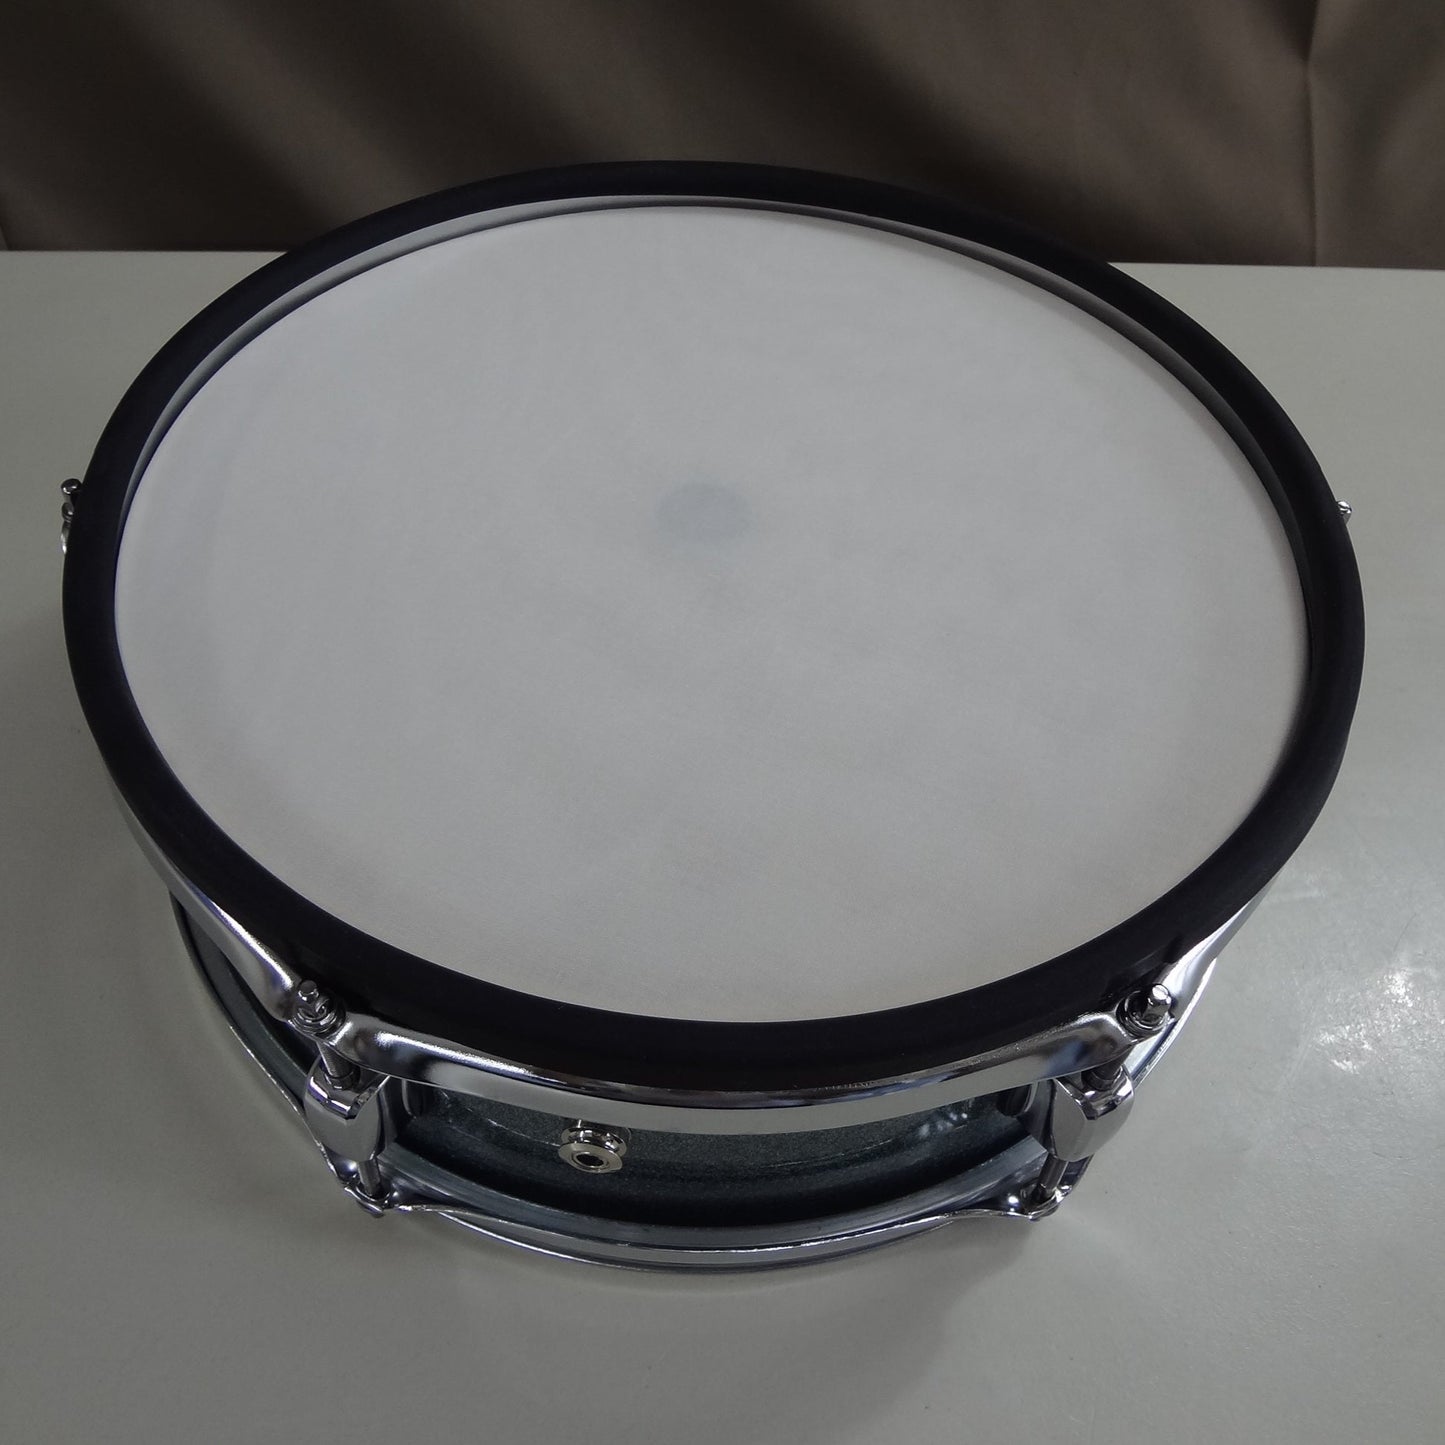 New 13 Inch Custom Electronic Snare Drum - Teal Sparkle